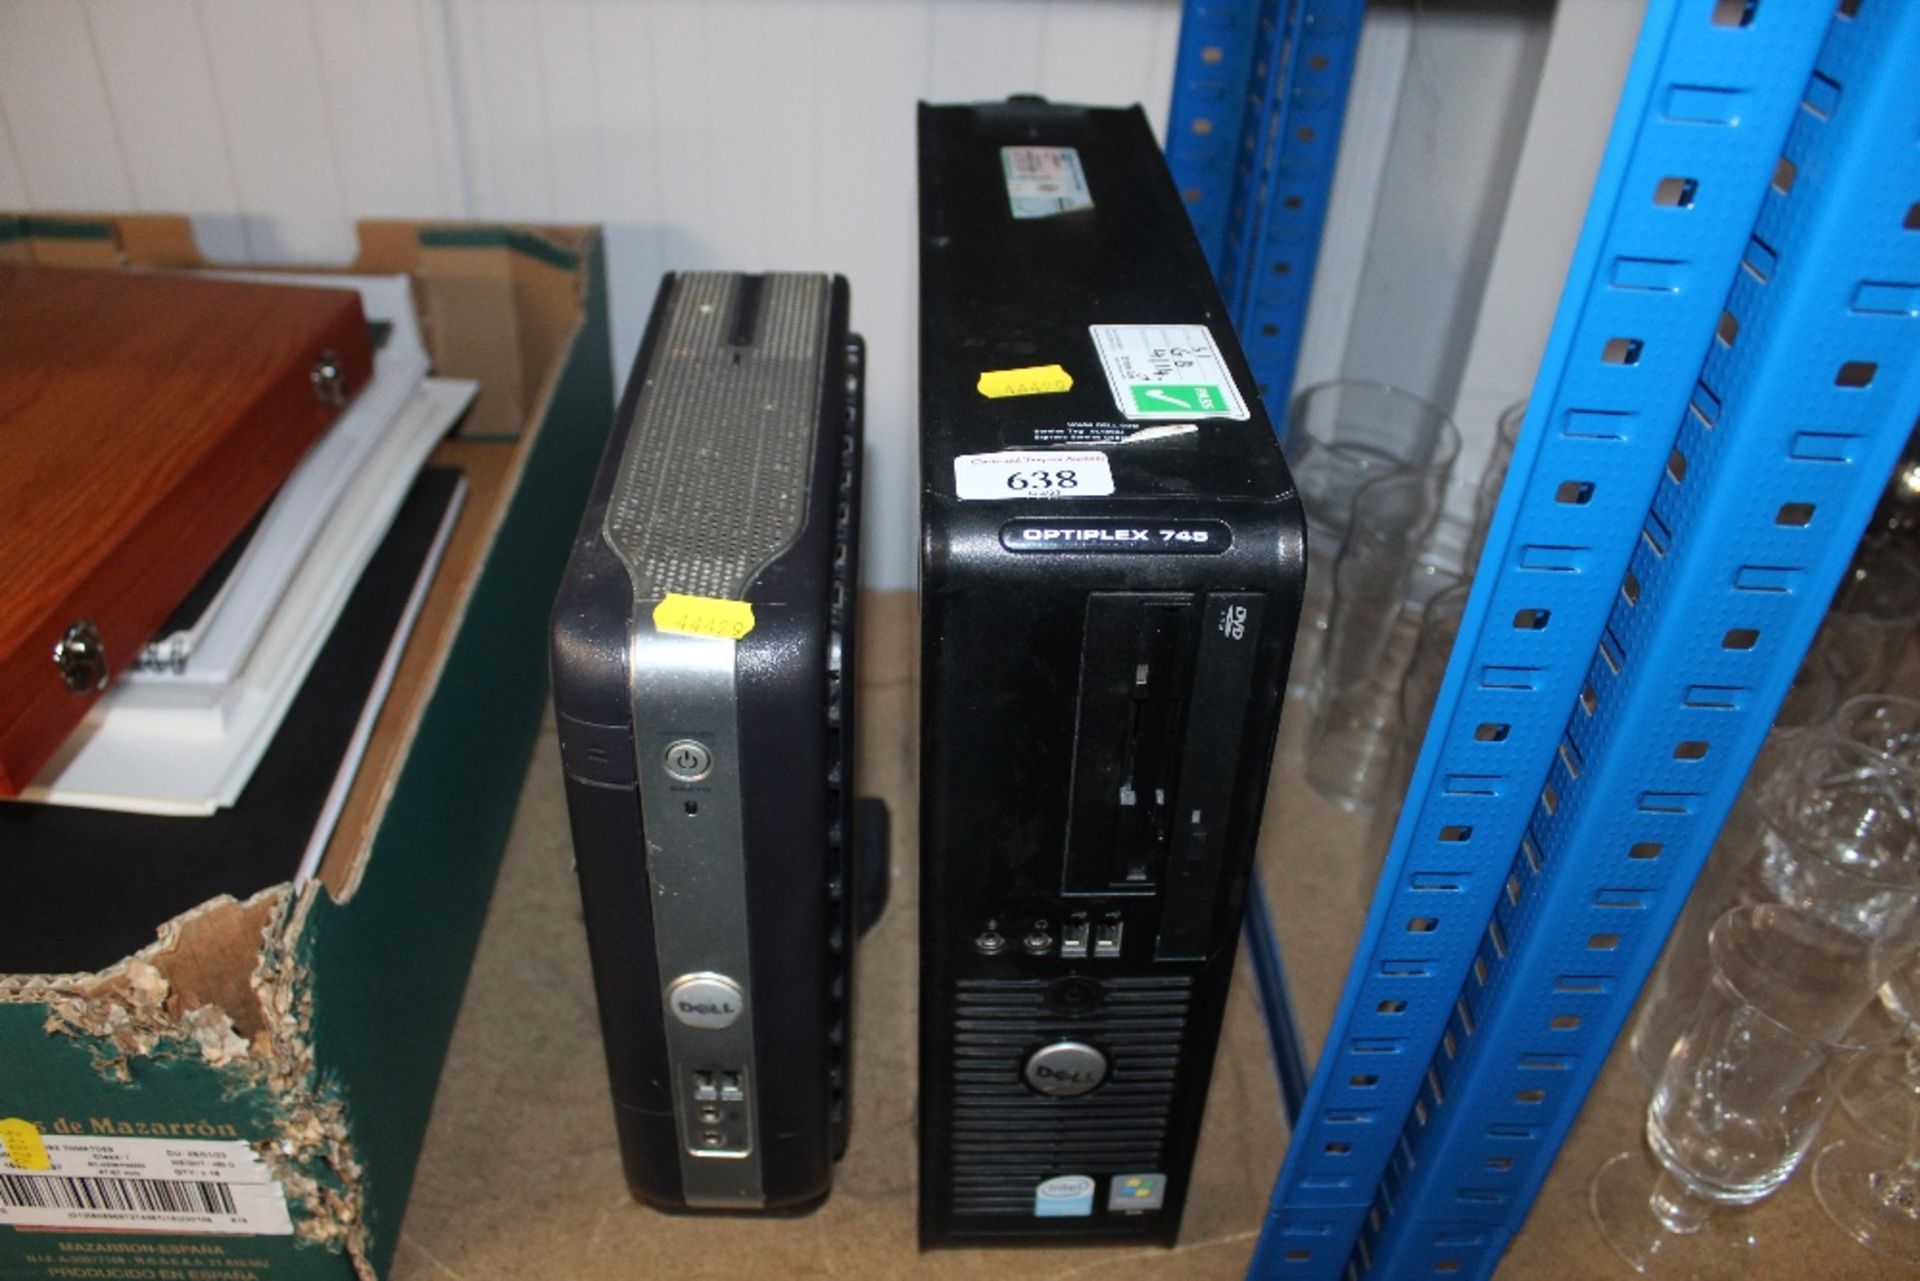 Two Dell computers, sold as seen, lacking leads